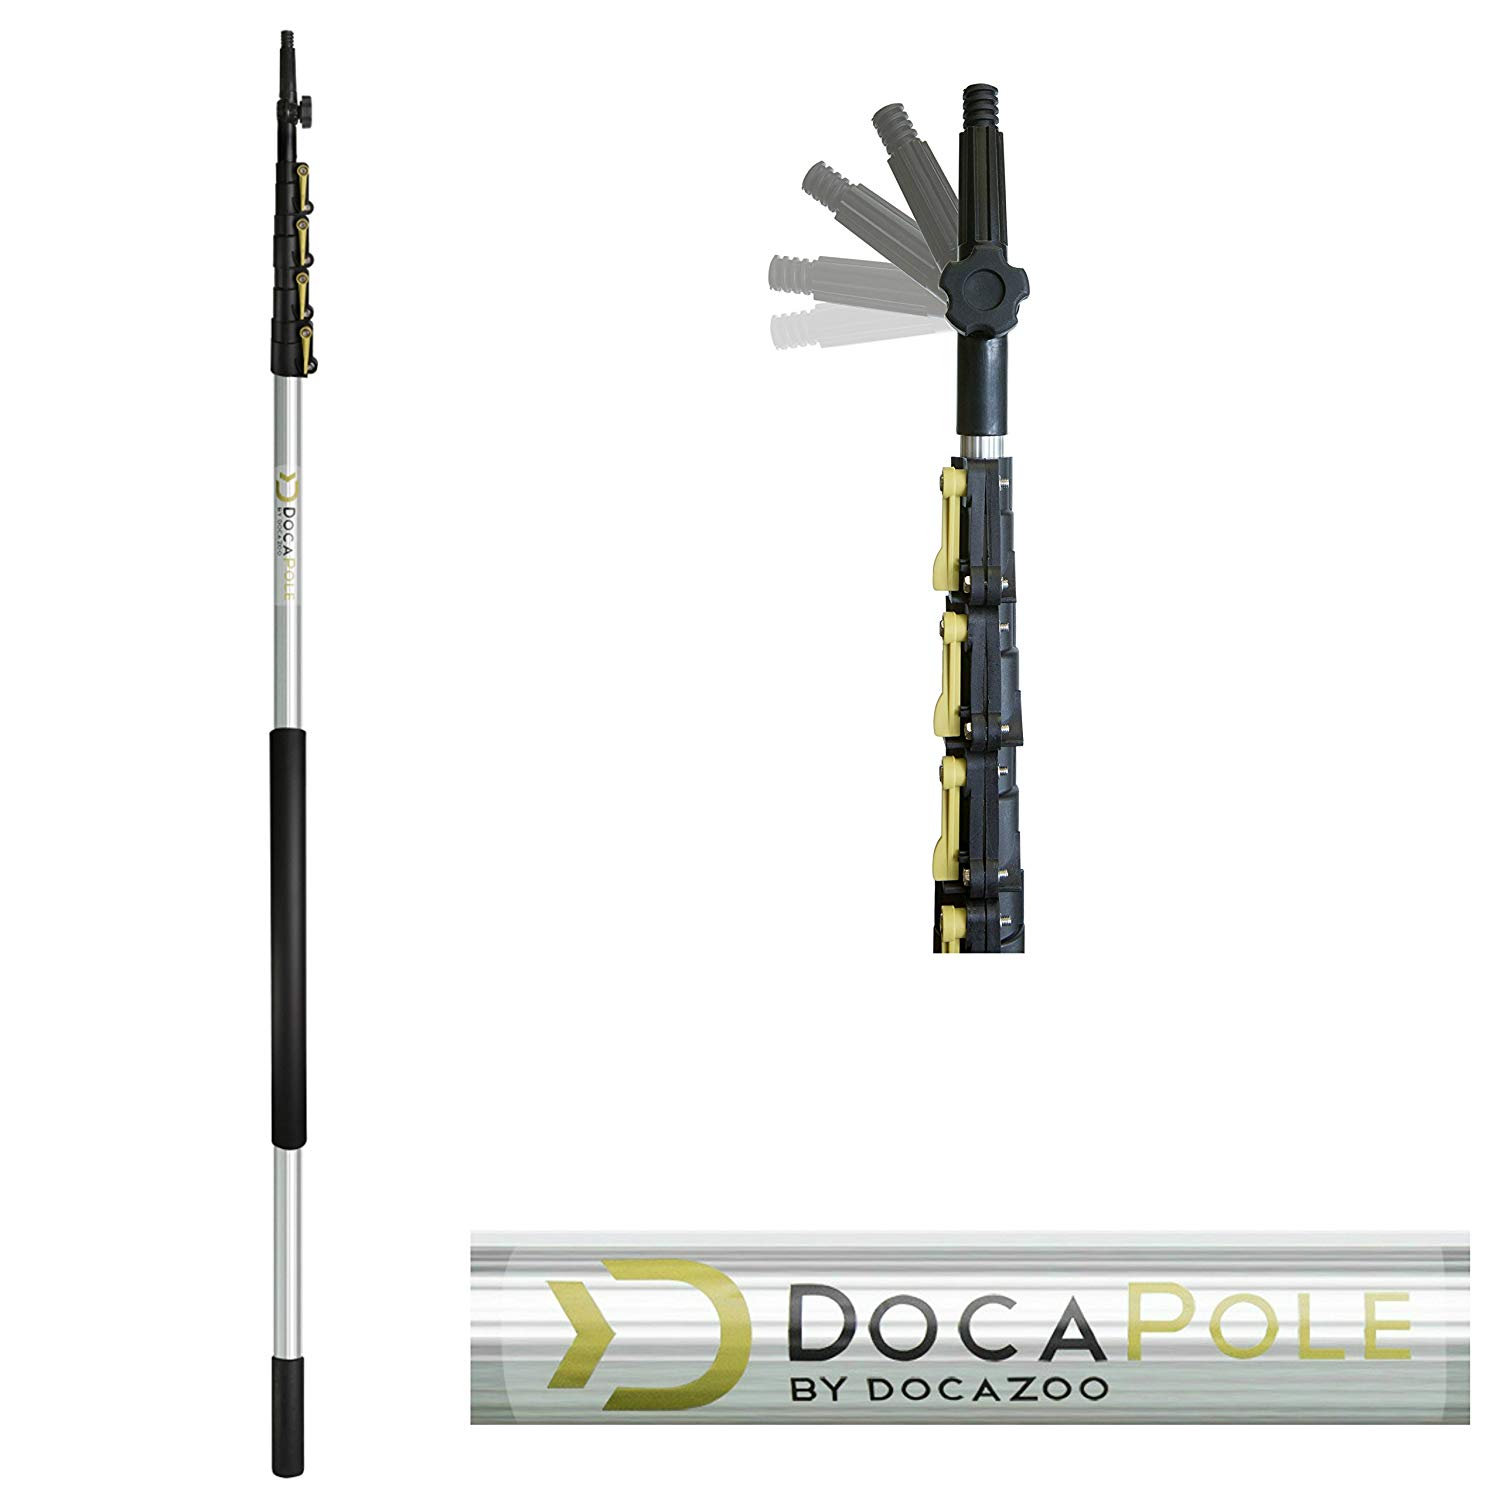 DocaPole 6-24 foot Extension Pole - Multi-Purpose Telescopic Pole//Light Bulb Changer//Paint Roller//Duster Pole//Telescoping Pole for Window Cleaning, Gutter Cleaning, and Hanging Lights